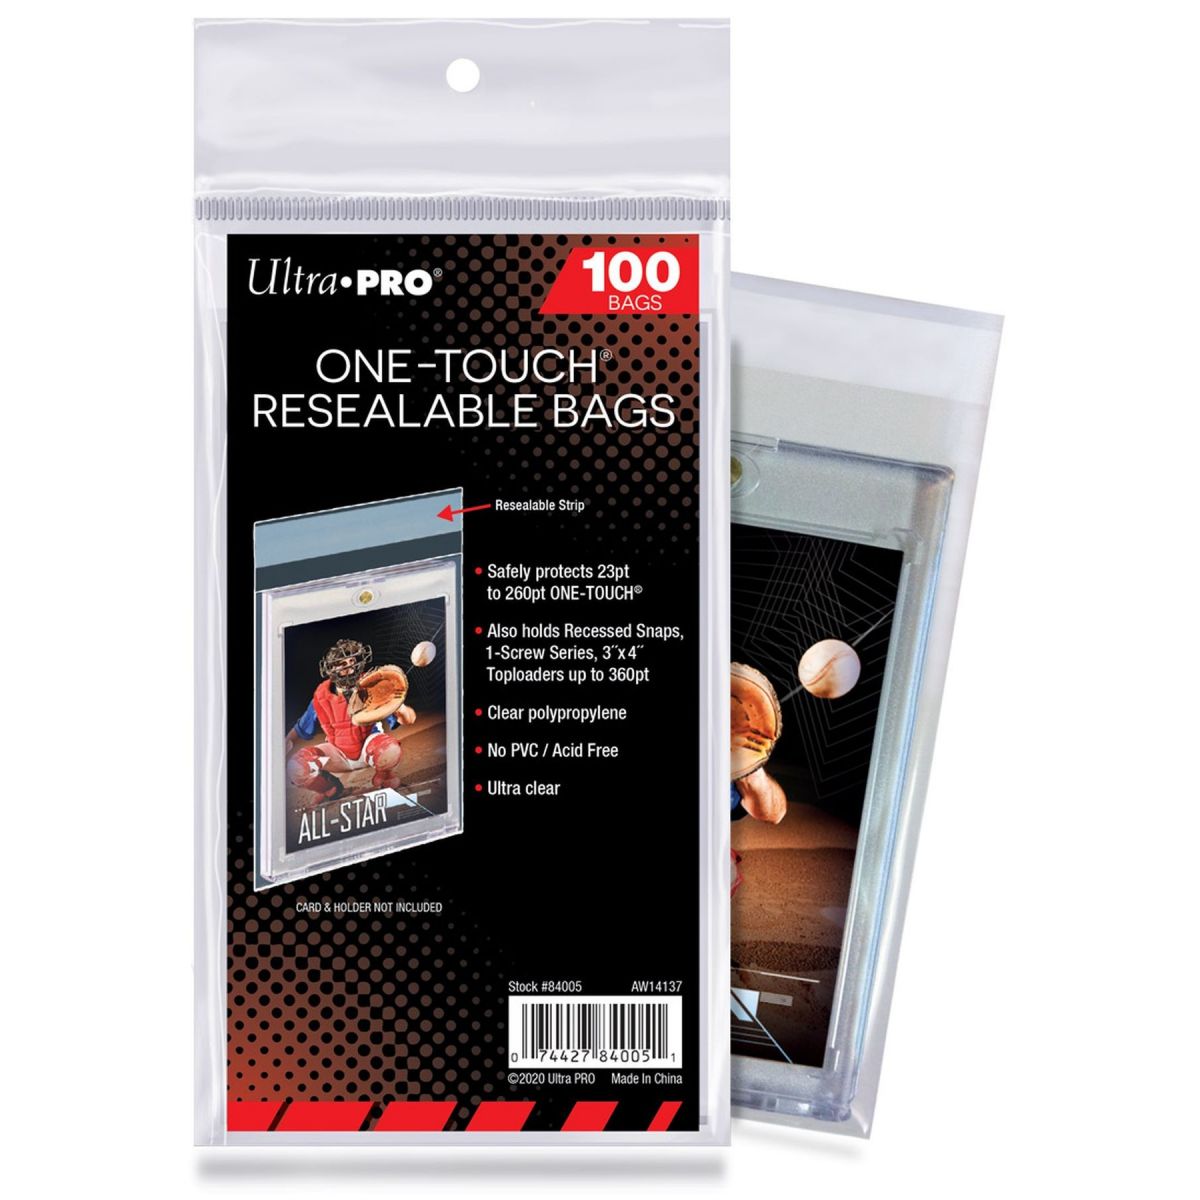 Ultra Pro - Team Bags - One-Touch Resealable Bag - Protège-cartes One-Touch Refermables (100)